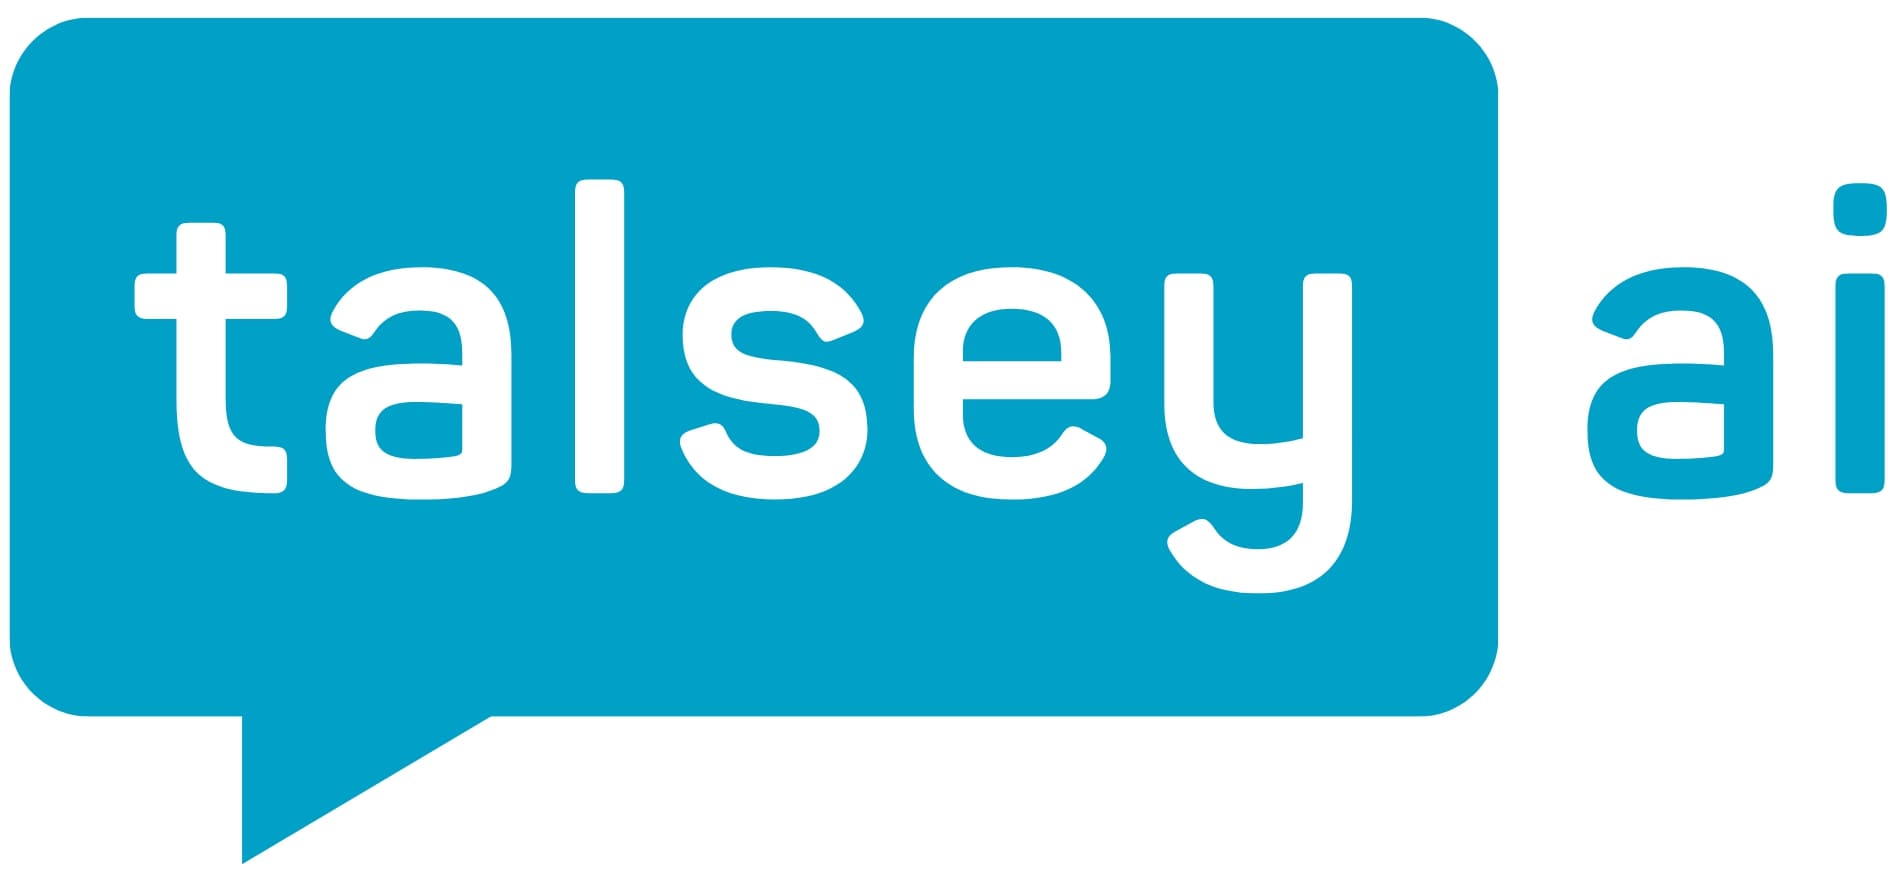 Talsey AI logo png in color - blue